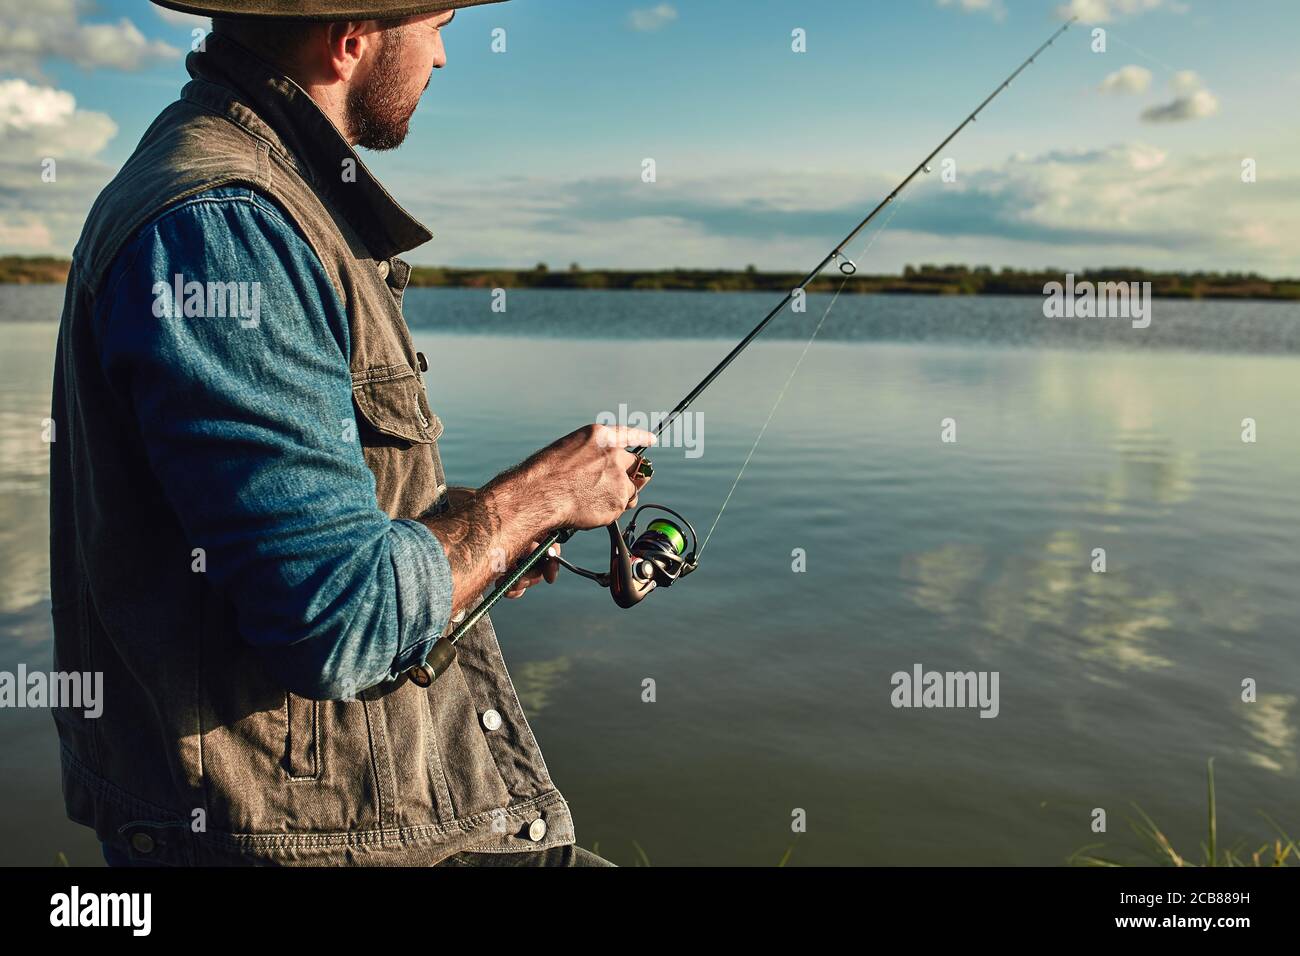 https://c8.alamy.com/comp/2CB889H/caucasian-adult-bearded-men-stand-near-lake-and-hold-fishing-rod-he-looks-into-distance-and-at-float-fishing-is-meditation-2CB889H.jpg